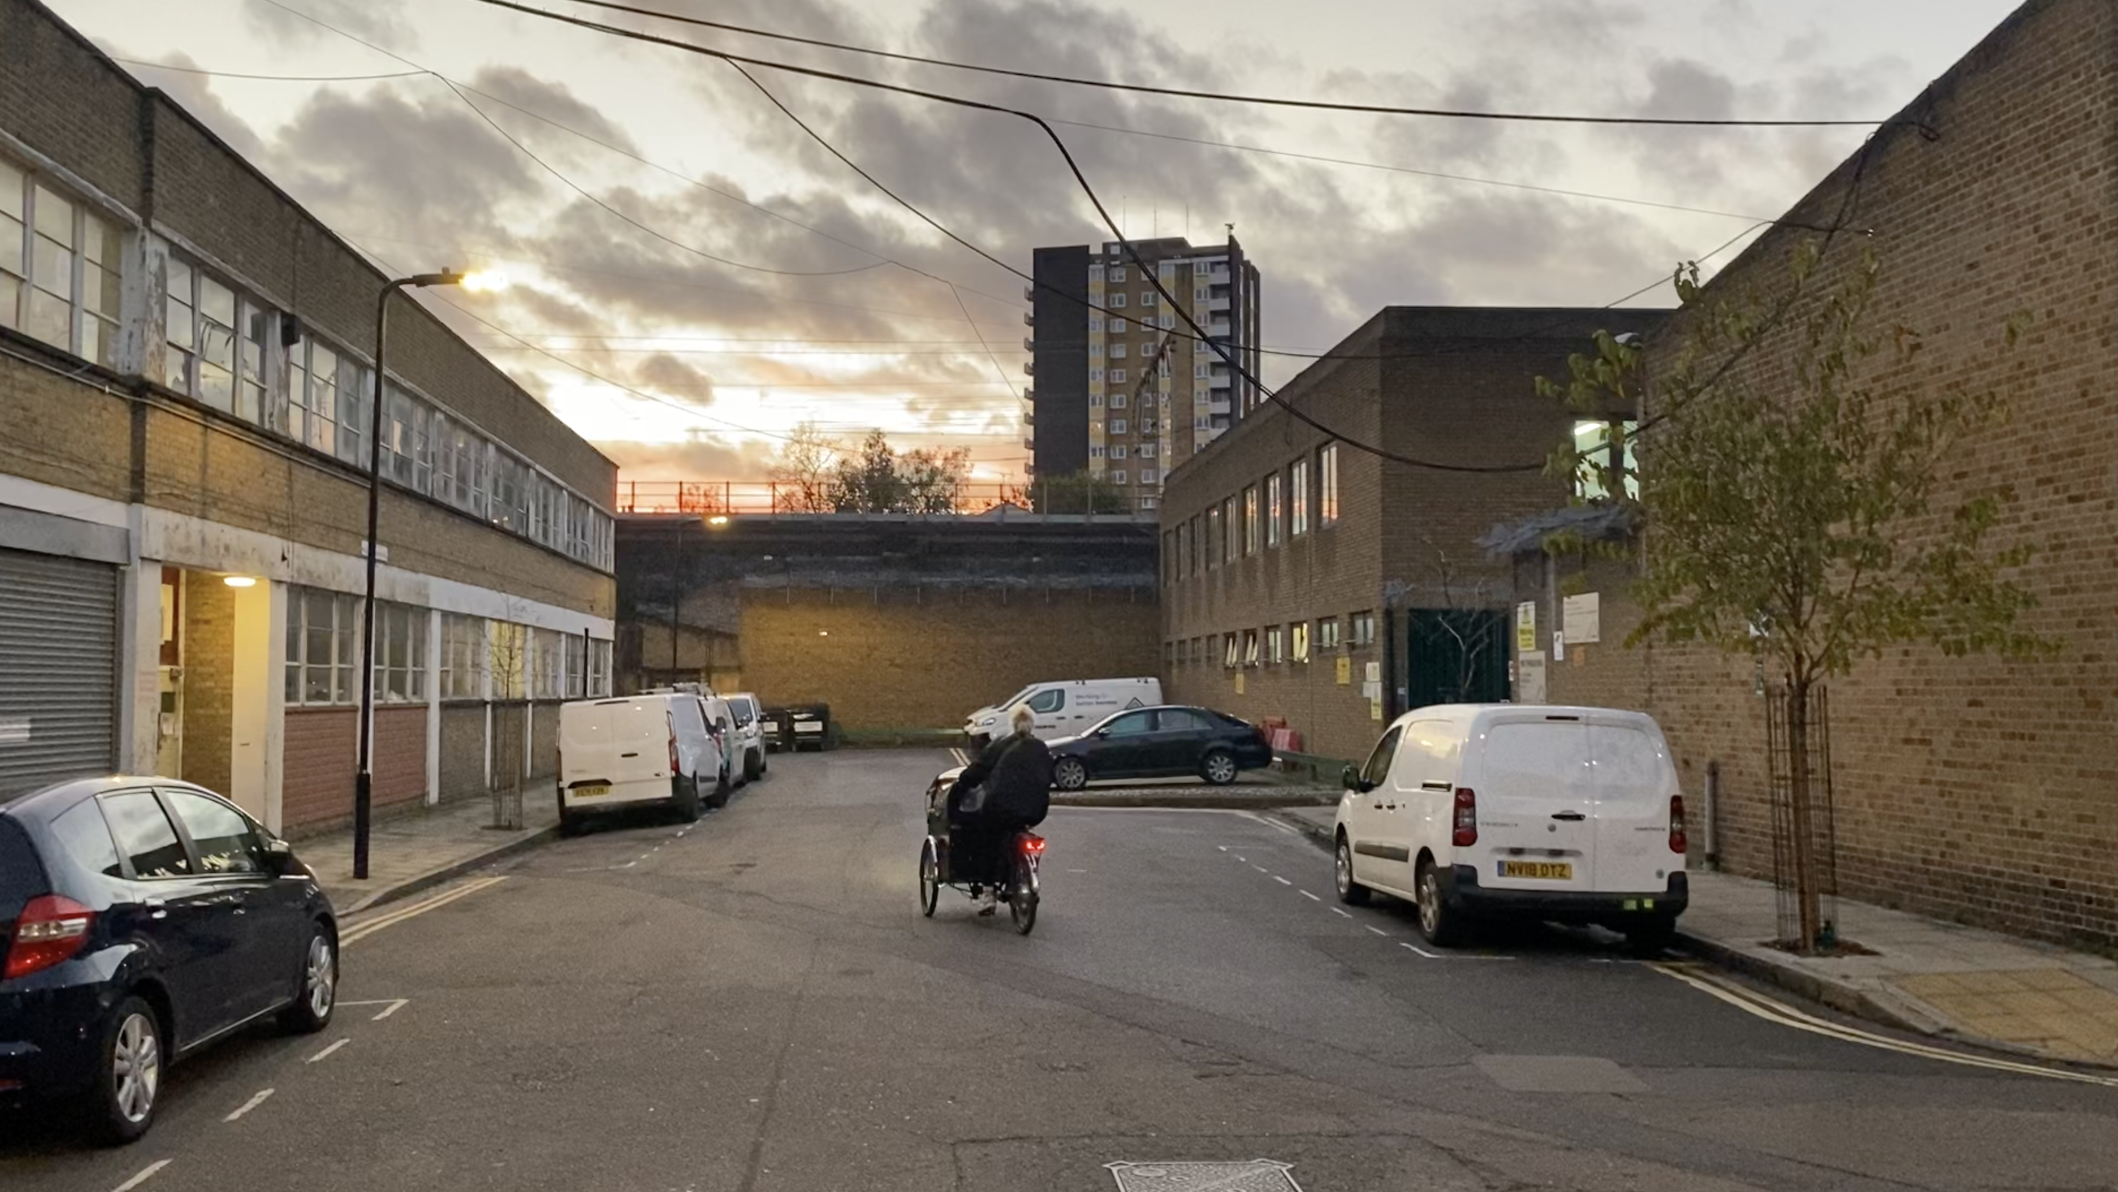 Florfield Depot – currently occupied by Hackney housing team and council IT’s support